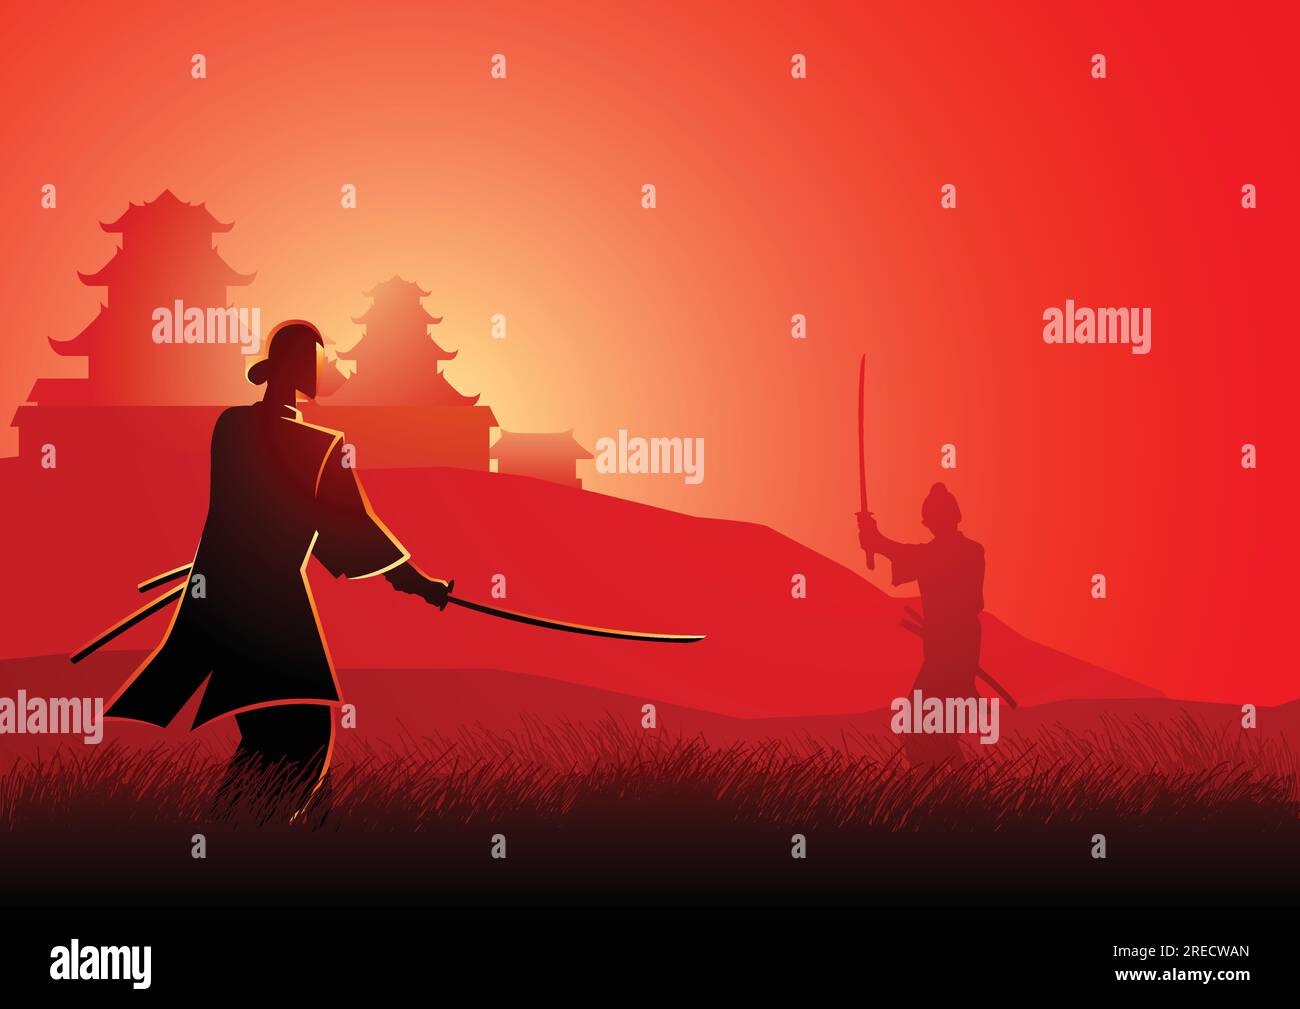 Illustration of two Samurai in duel stance facing each other on grass field Stock Vector